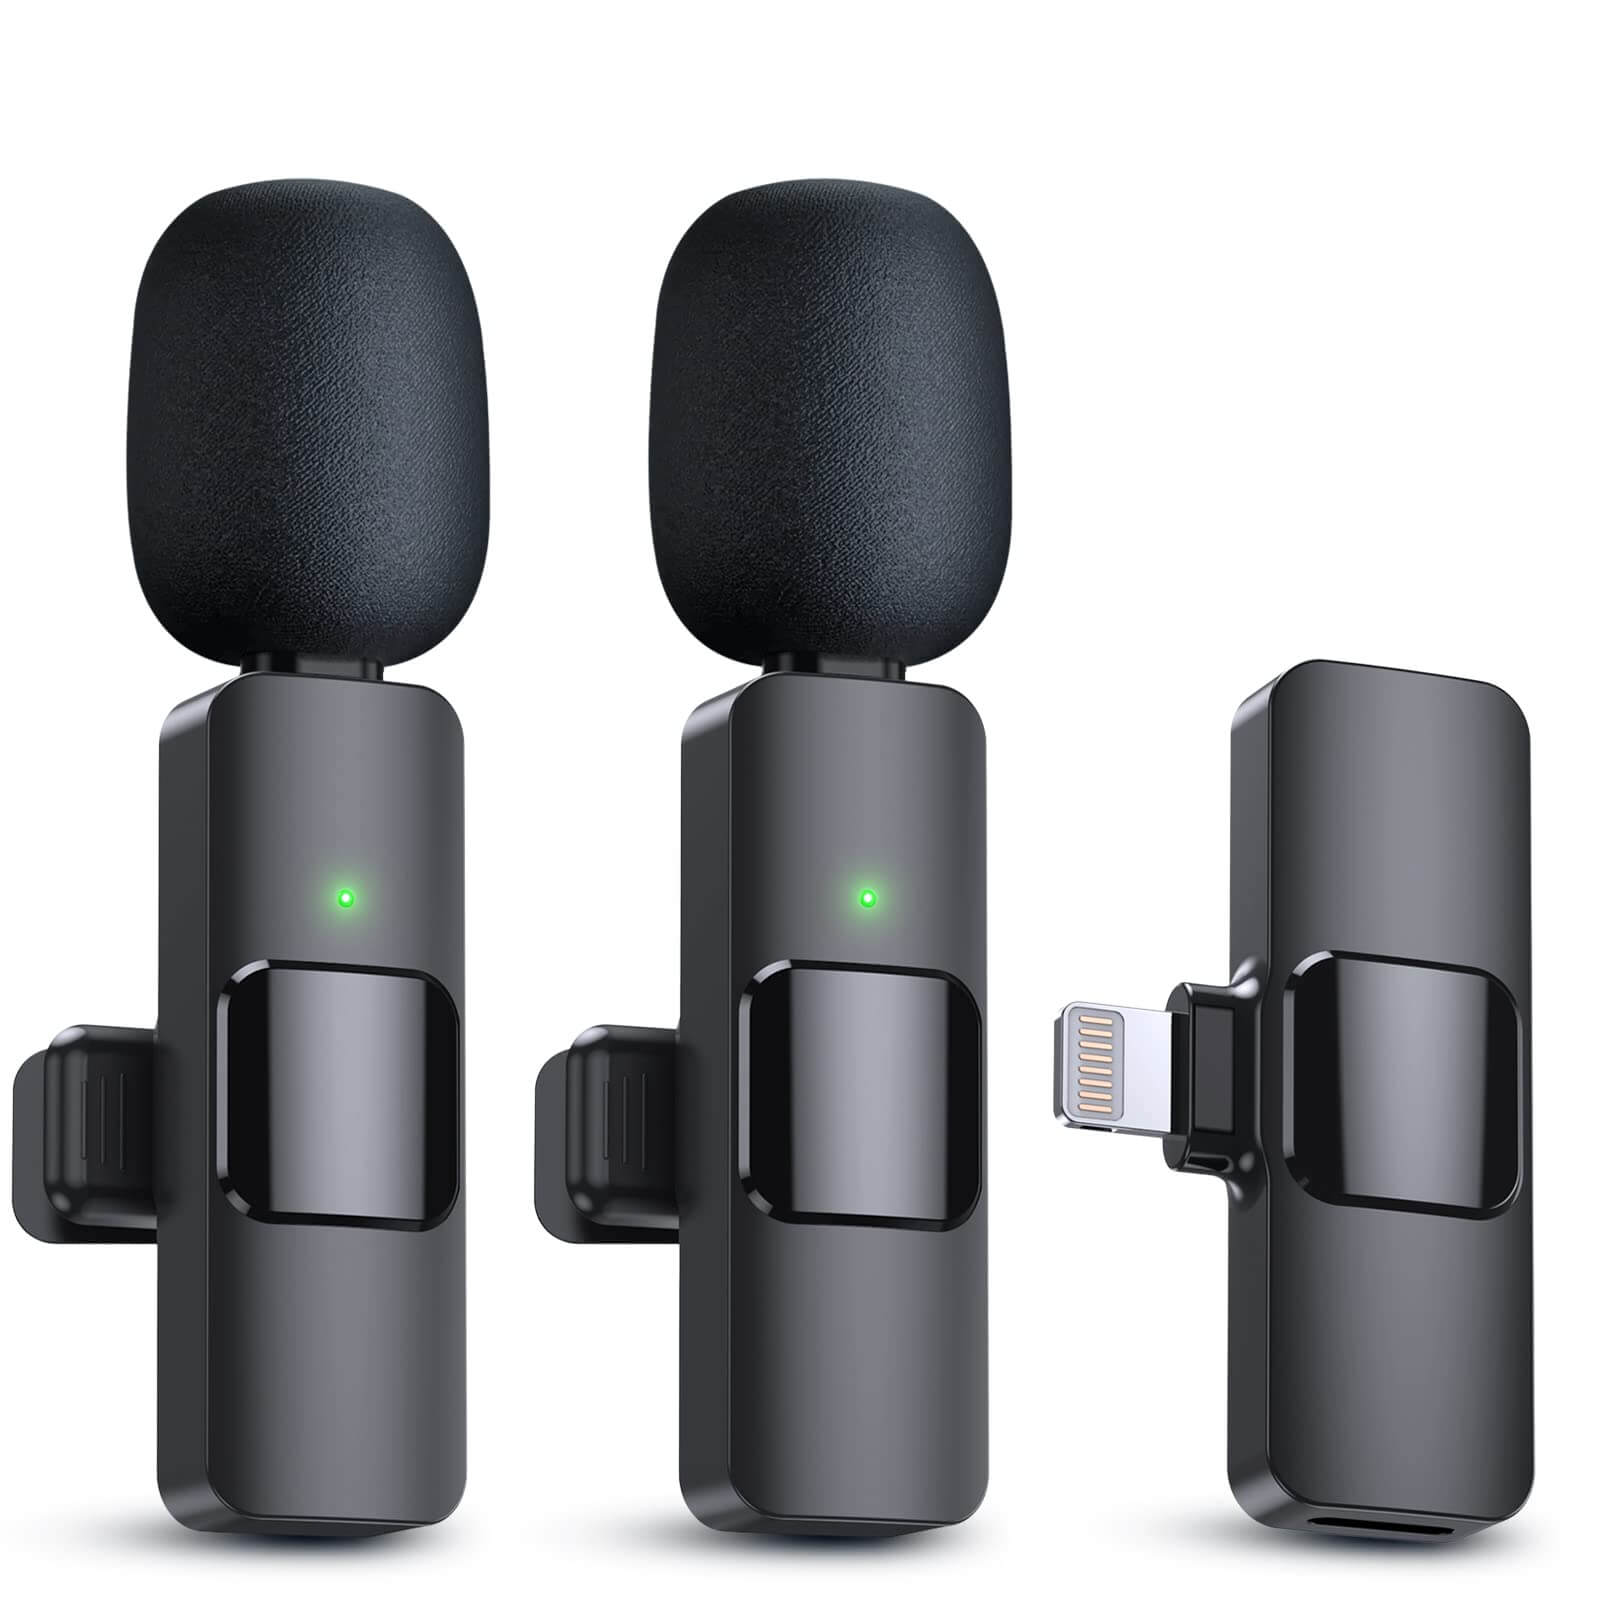 PQRQP 2 Pack Wireless Lavalier Microphones for iPhone 